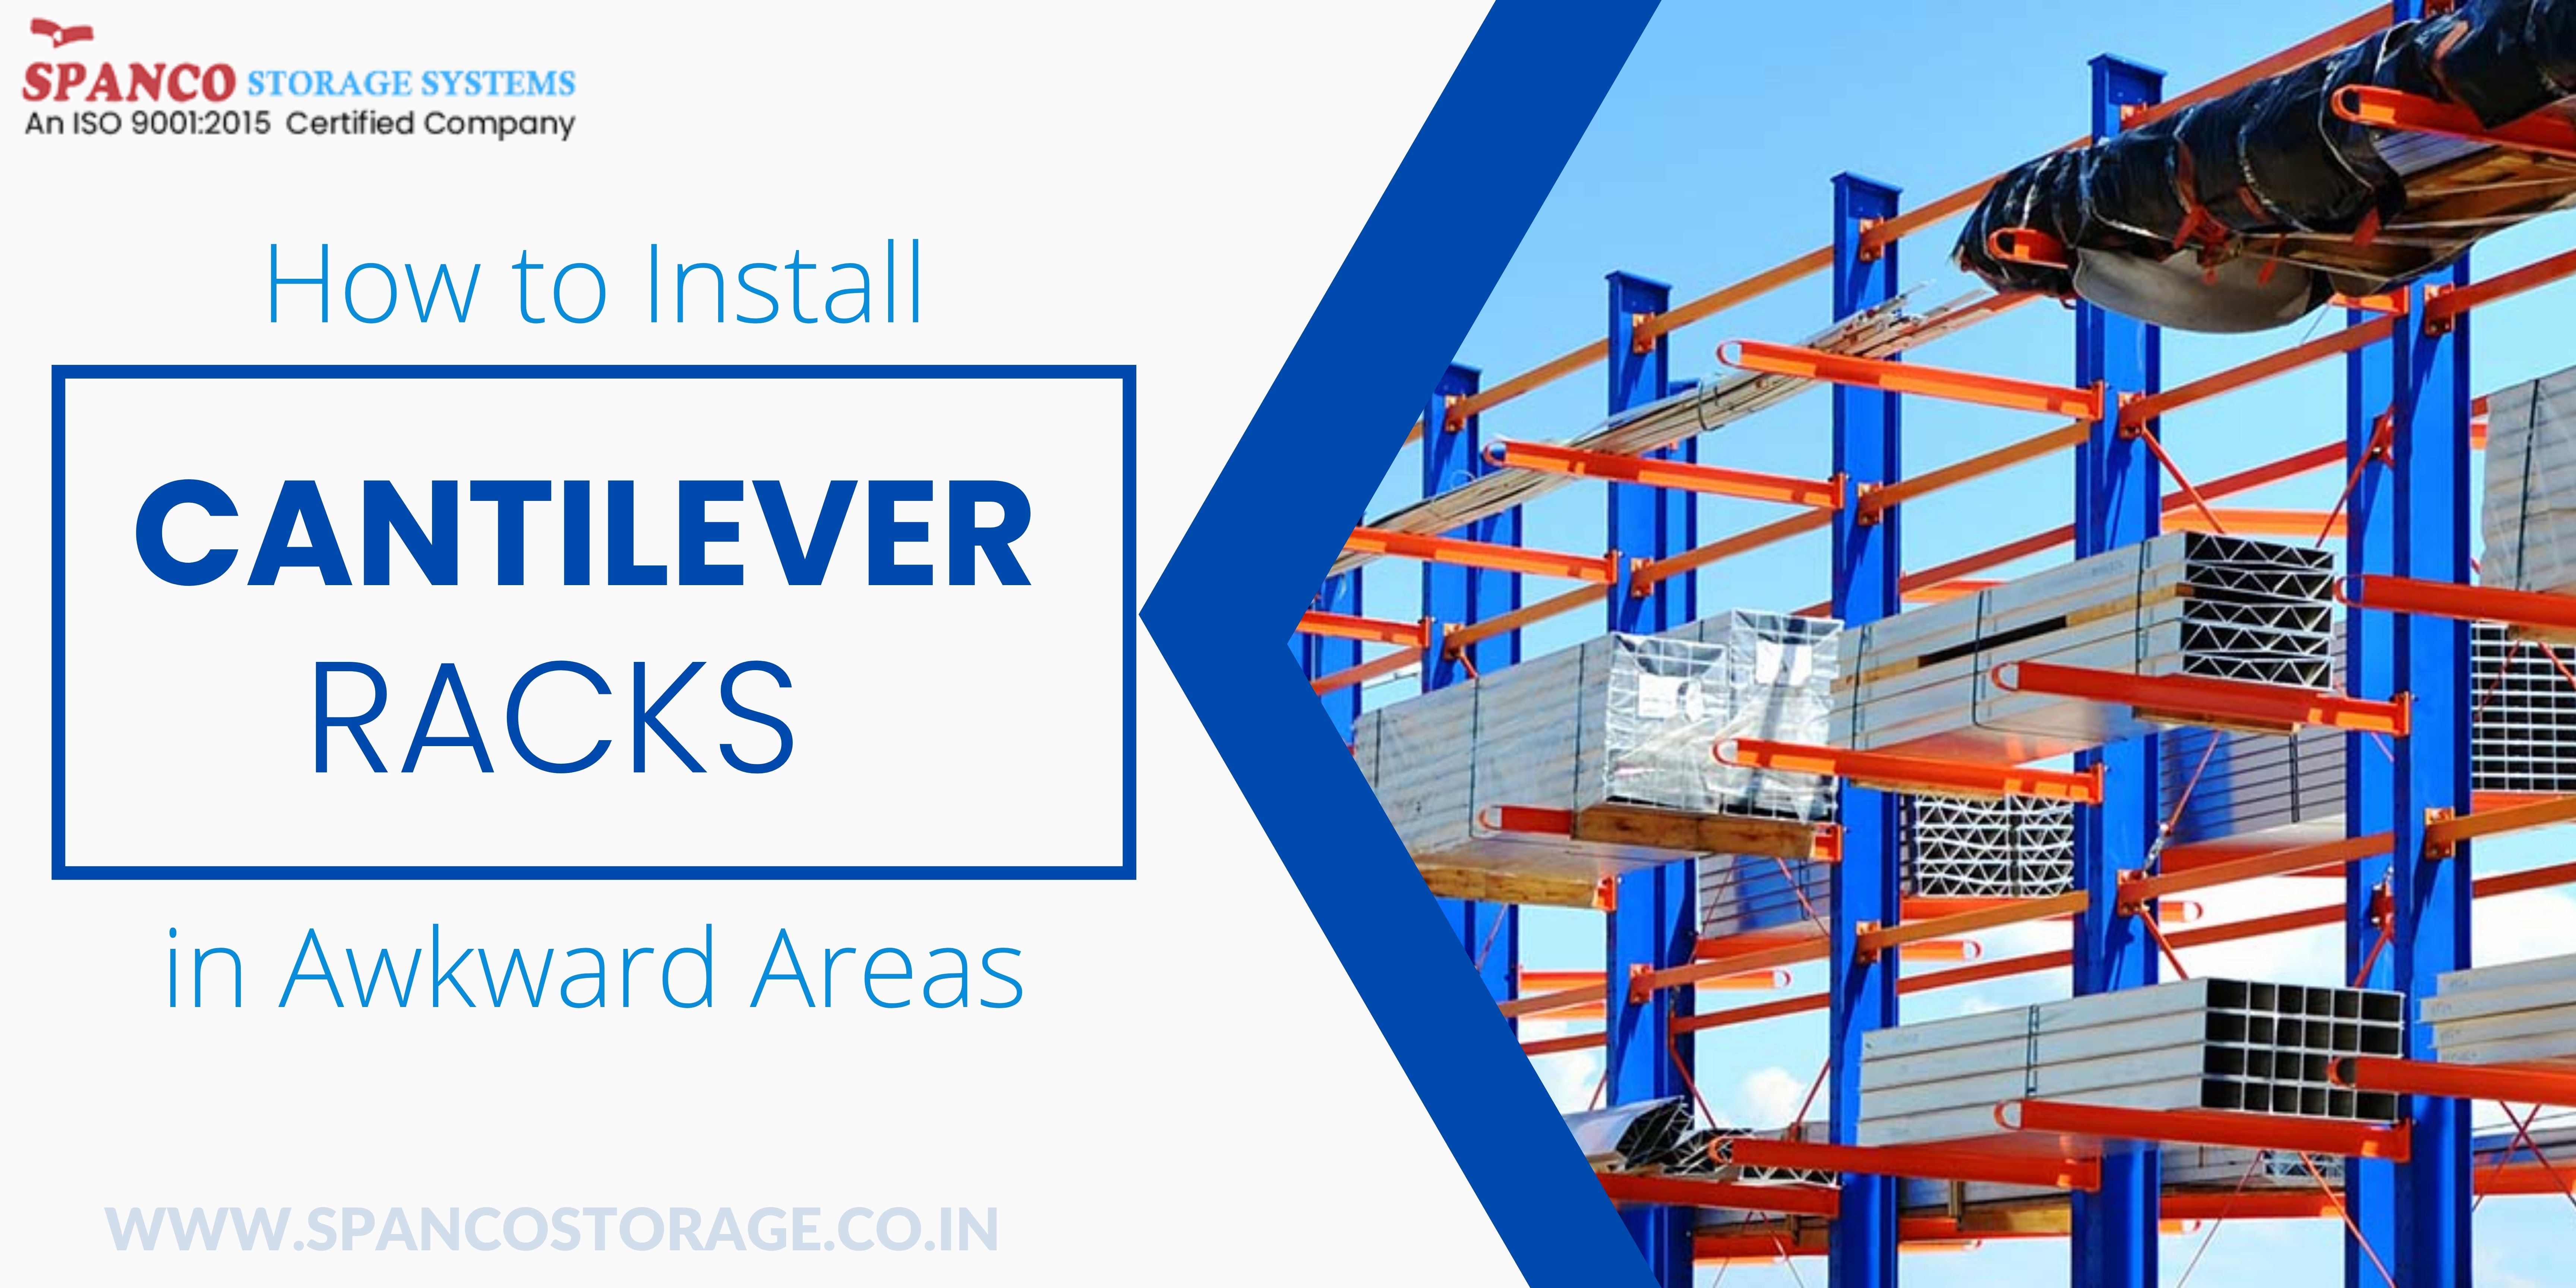 How to Install Cantilever Racks in Awkward Areas